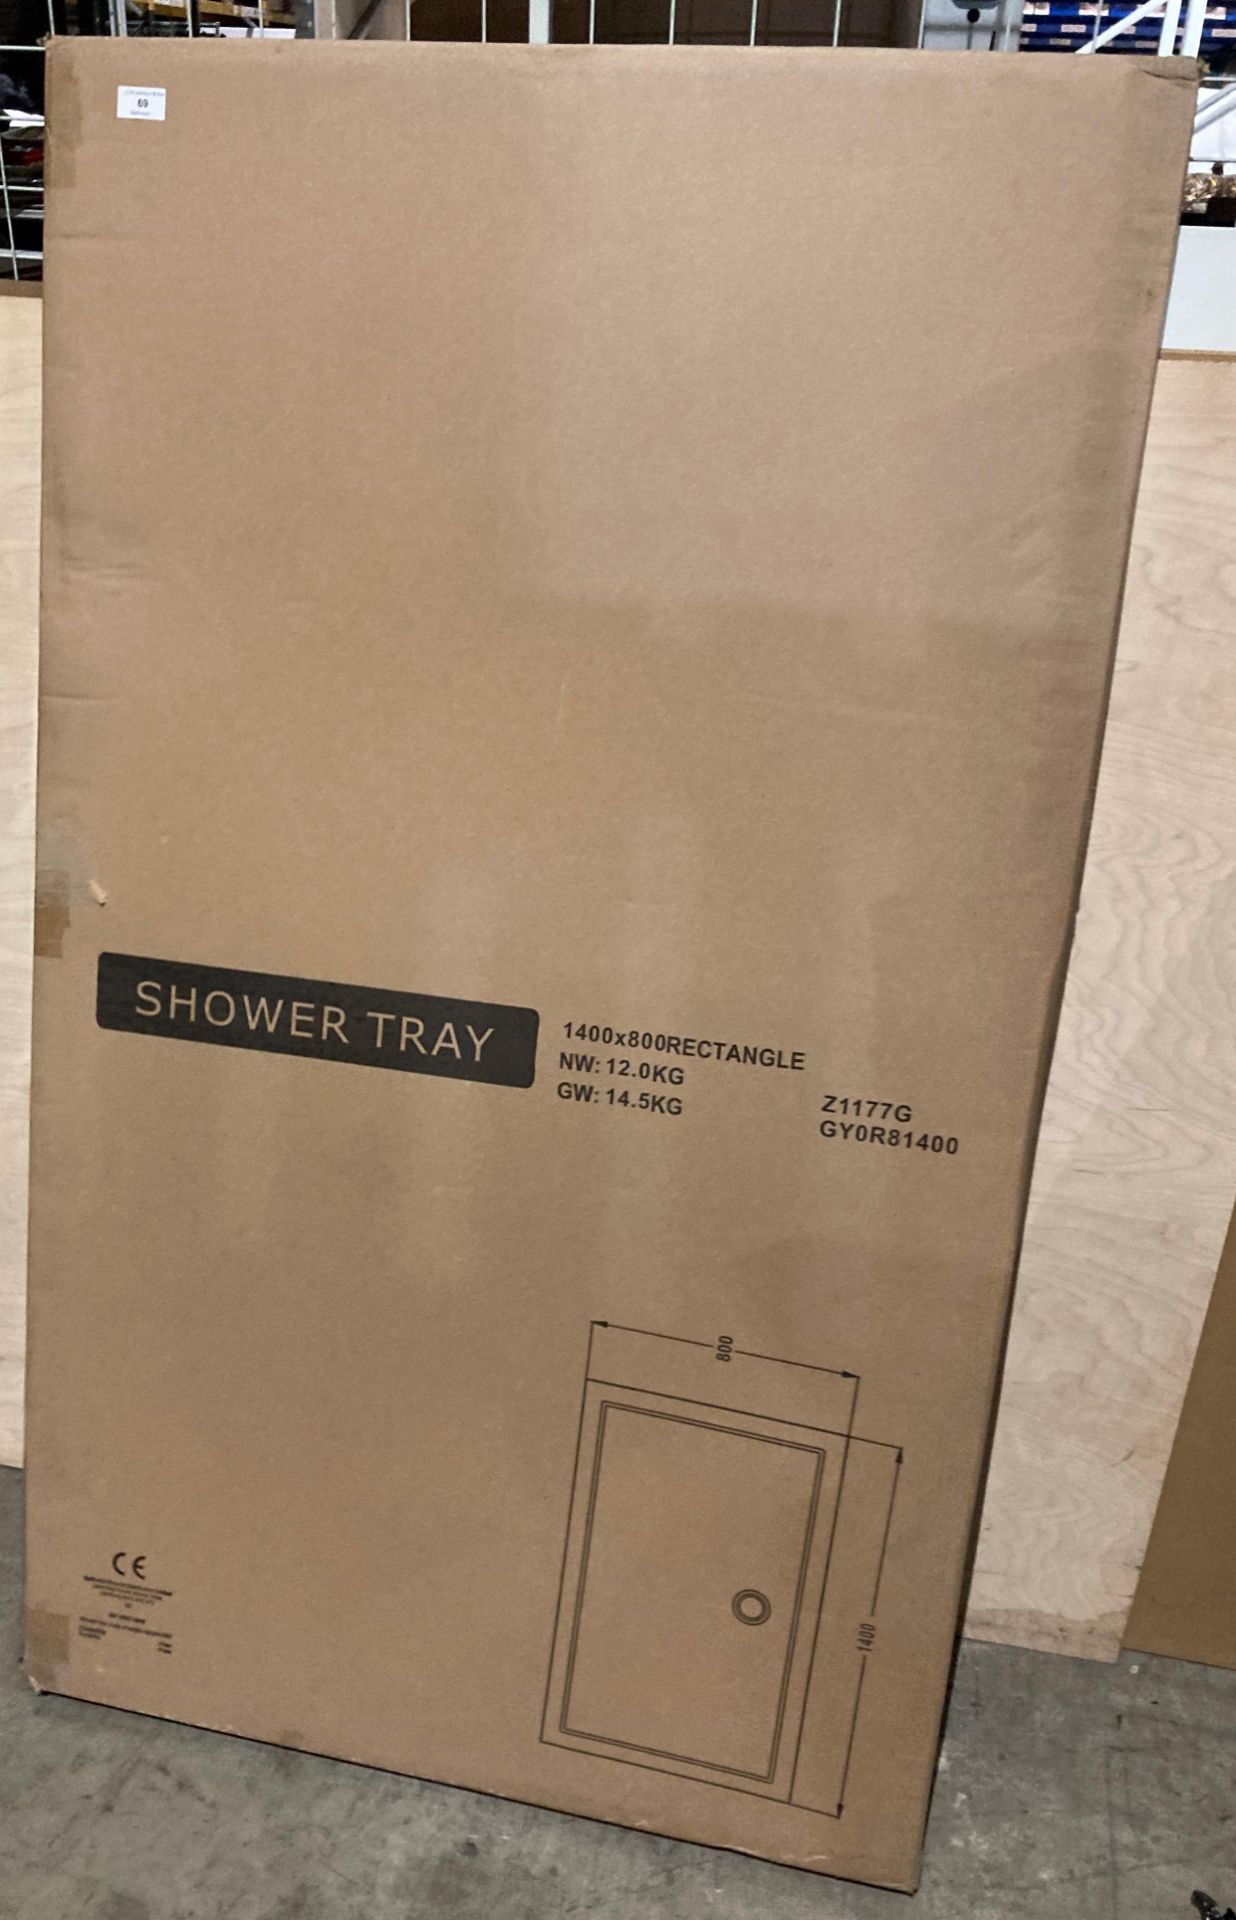 Unbranded shower tray 1400mm x 800mm boxed (saleroom location: OUTSIDE MEZ)